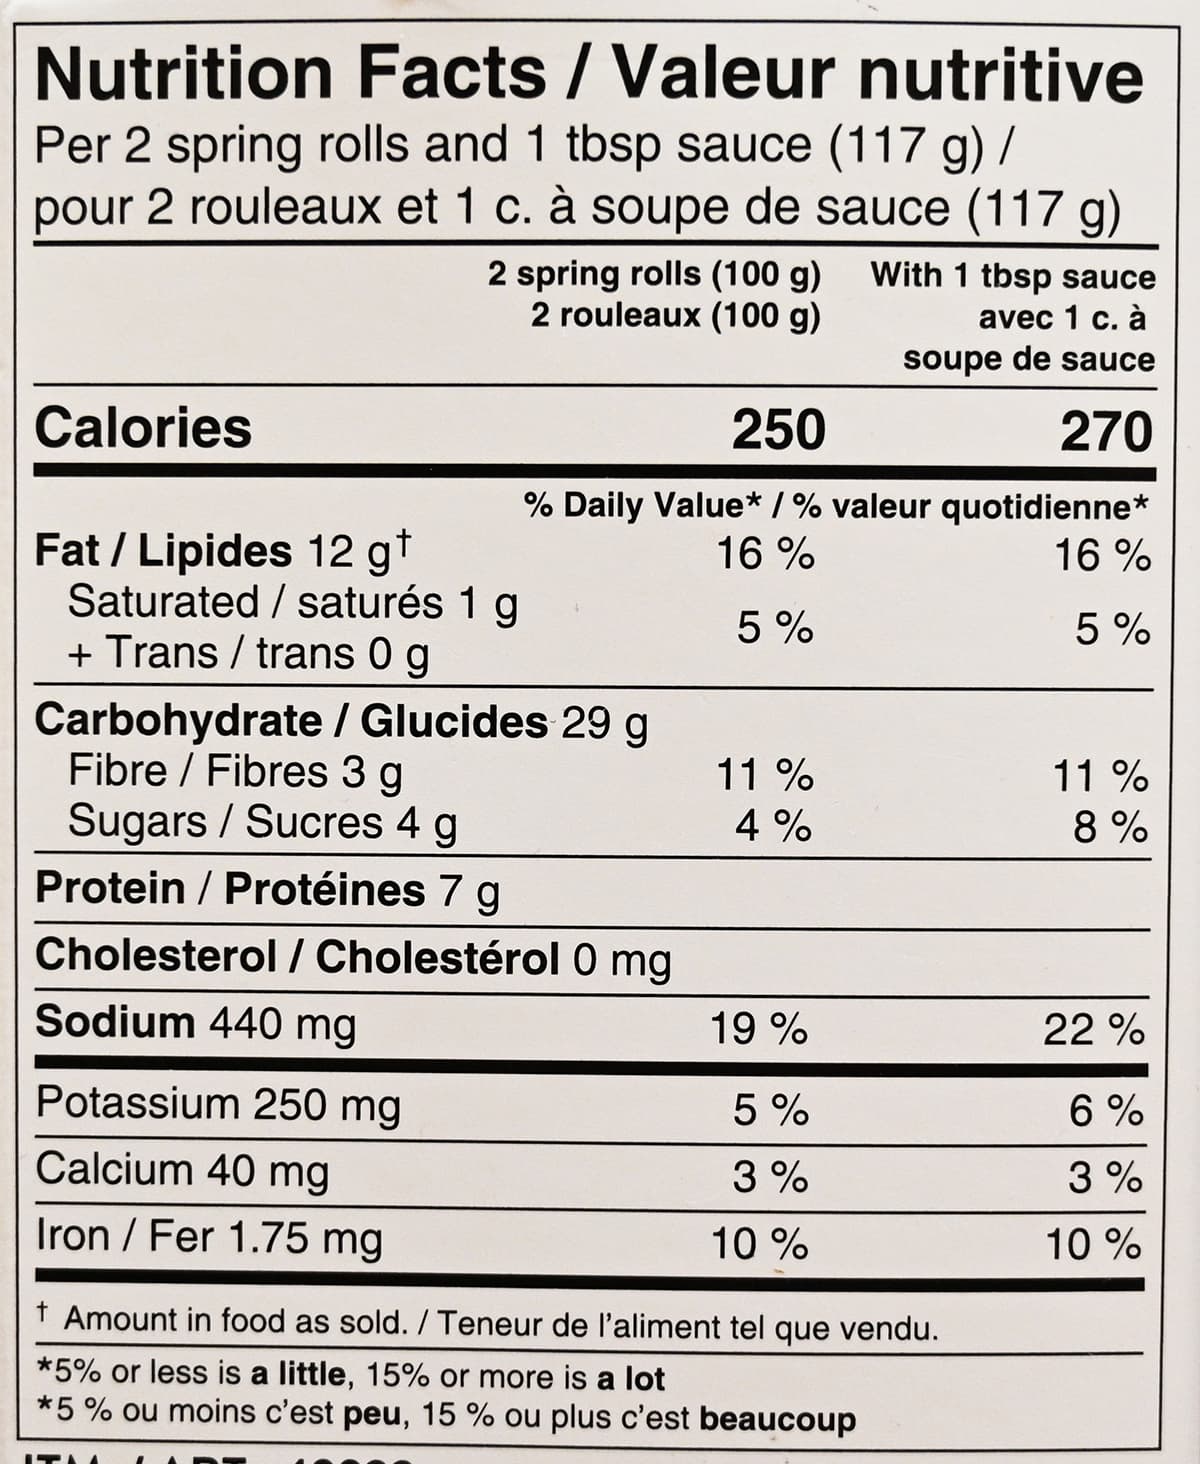 Image of the nutrition facts for the spring rolls and sauce from the back of the box.